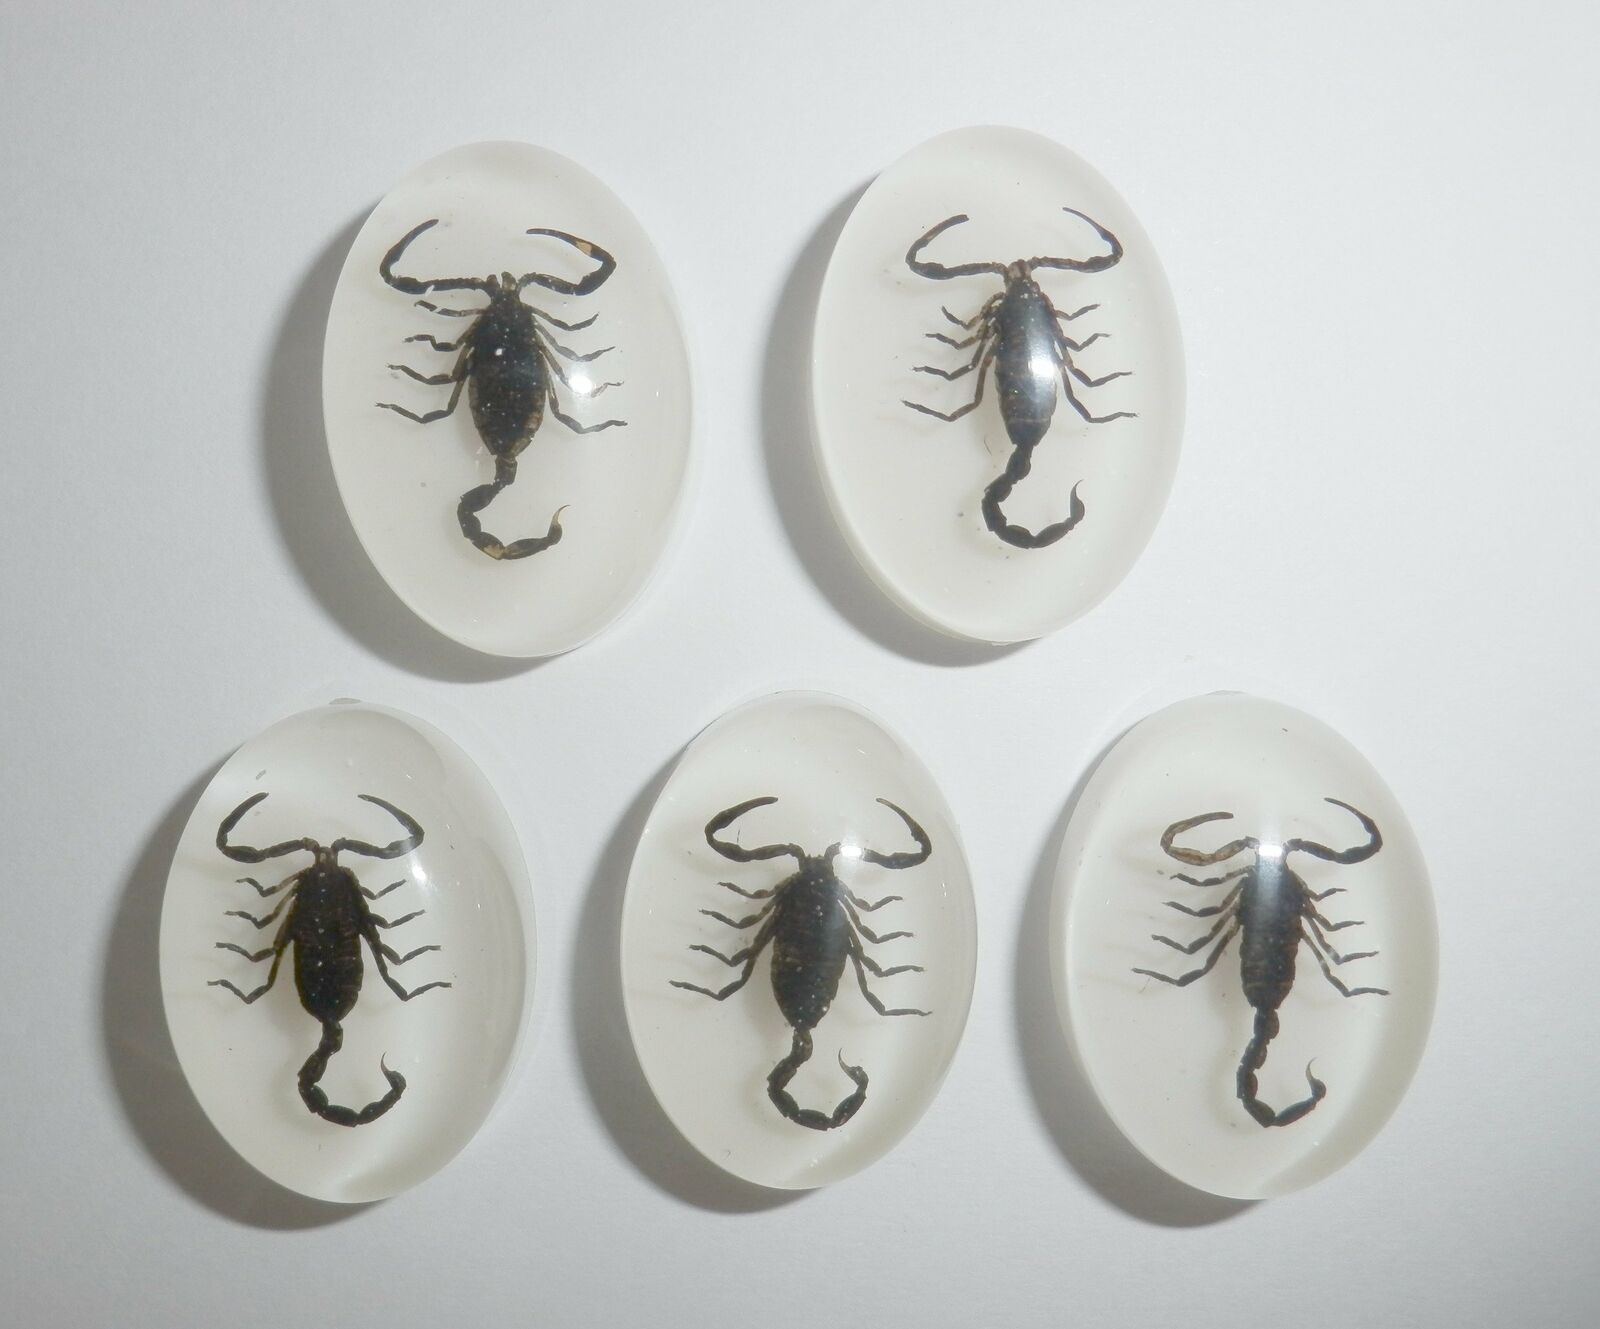 Insect Cabochon Black Scorpion Oval 18x25 mm on White bottom 100 pieces Lot